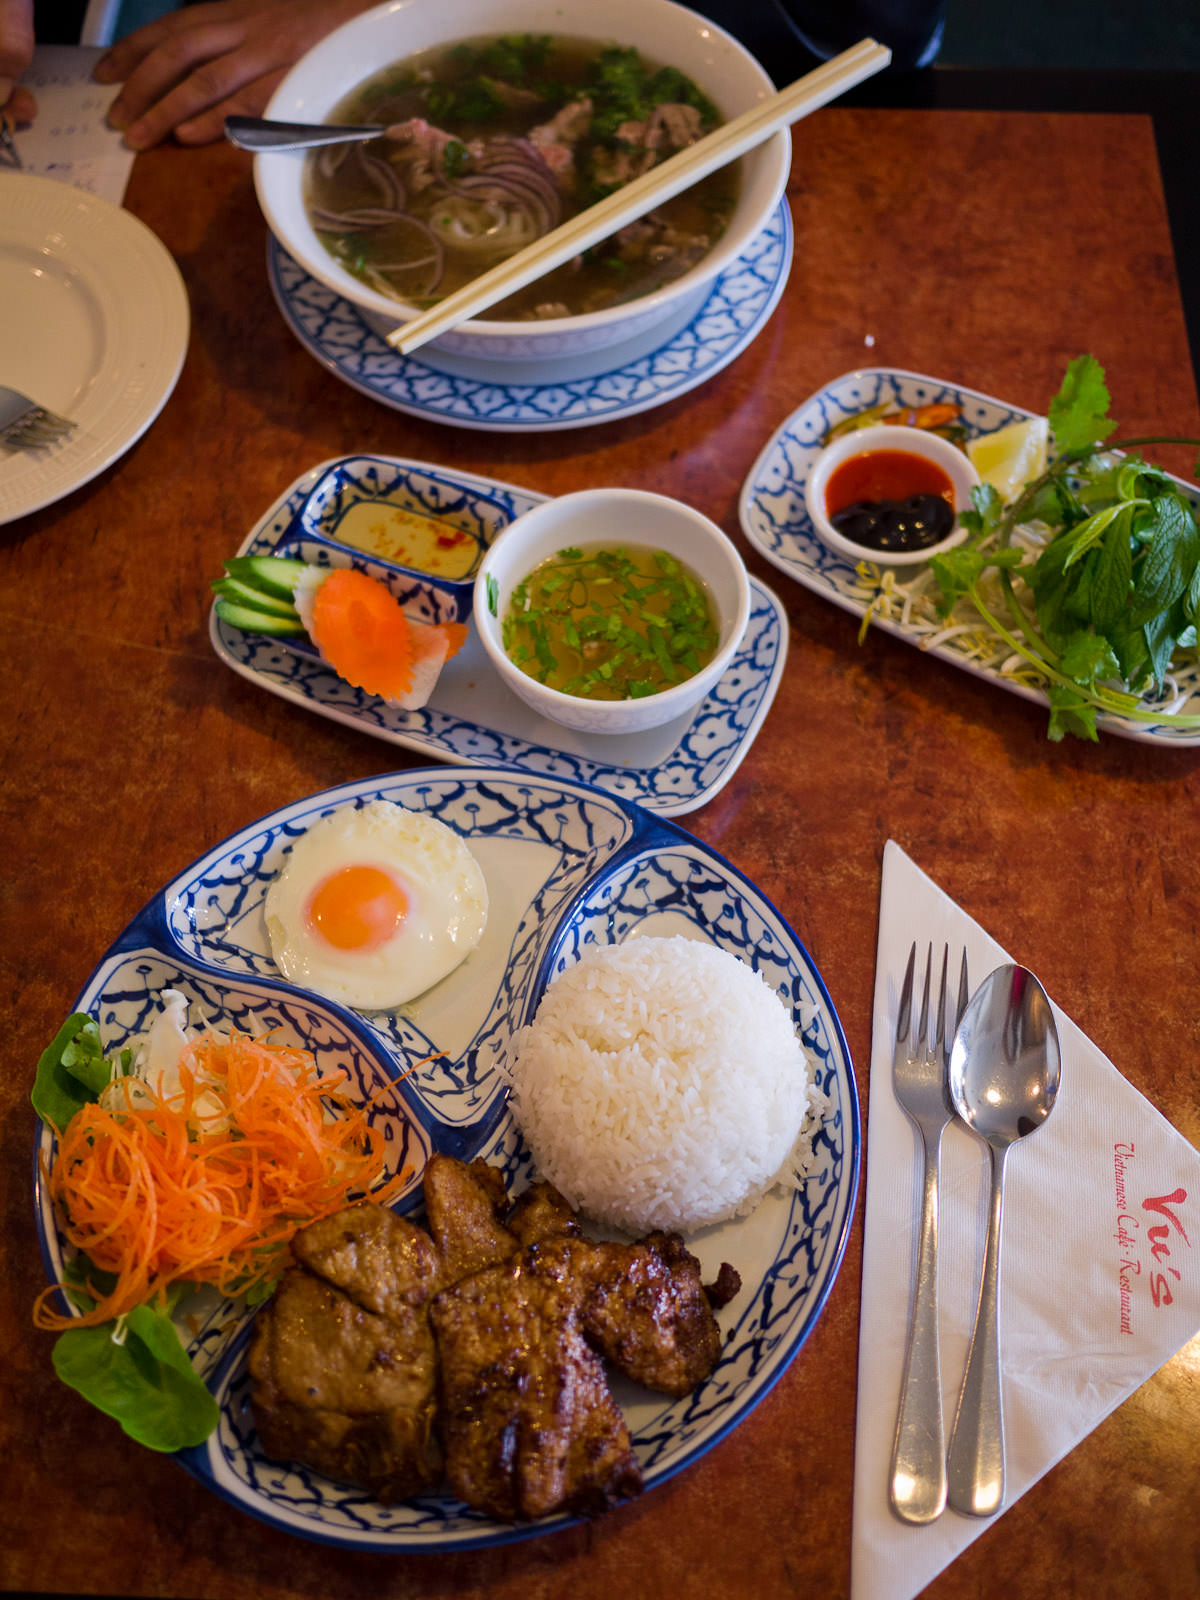 Discussing household finances over Vietnamese lunch